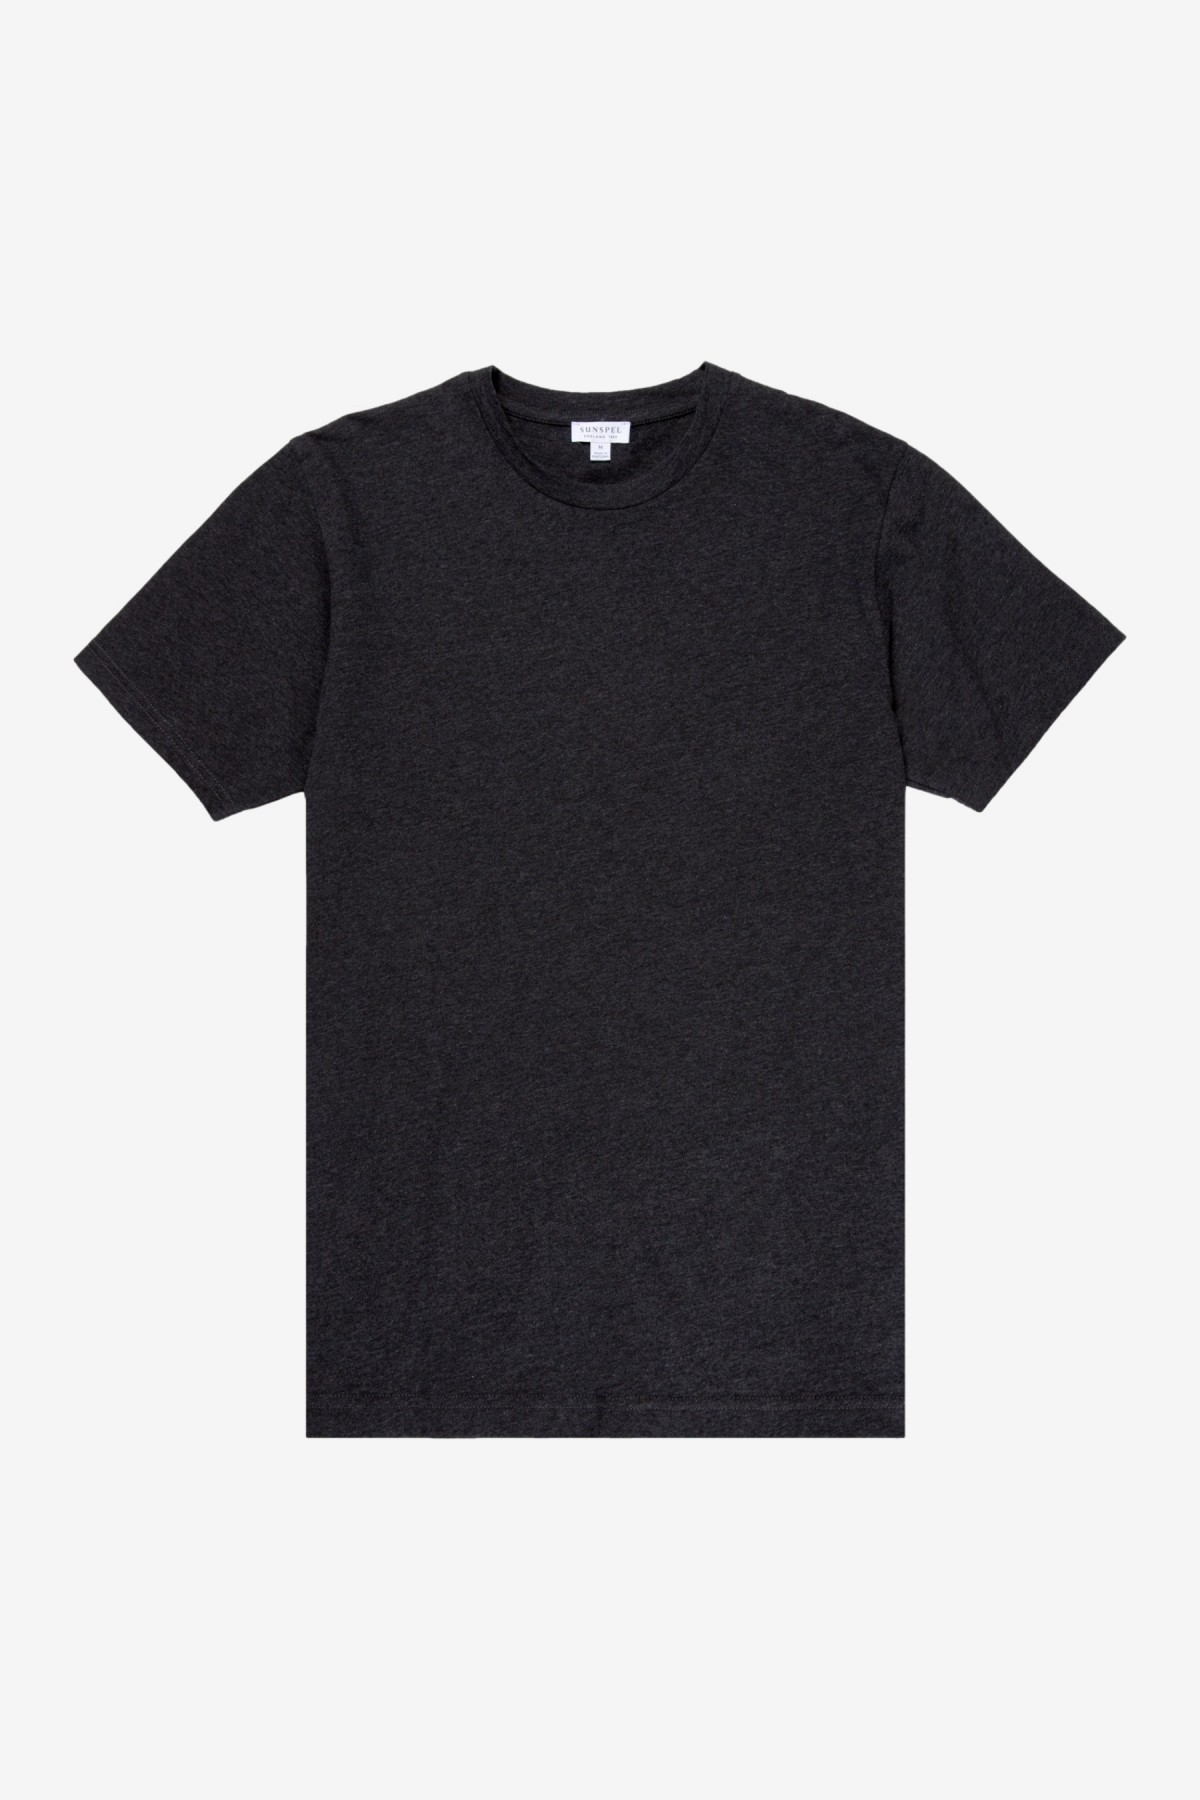 Sunspel Short Sleeve Classic Crew Neck T-Shirt in Charcoal